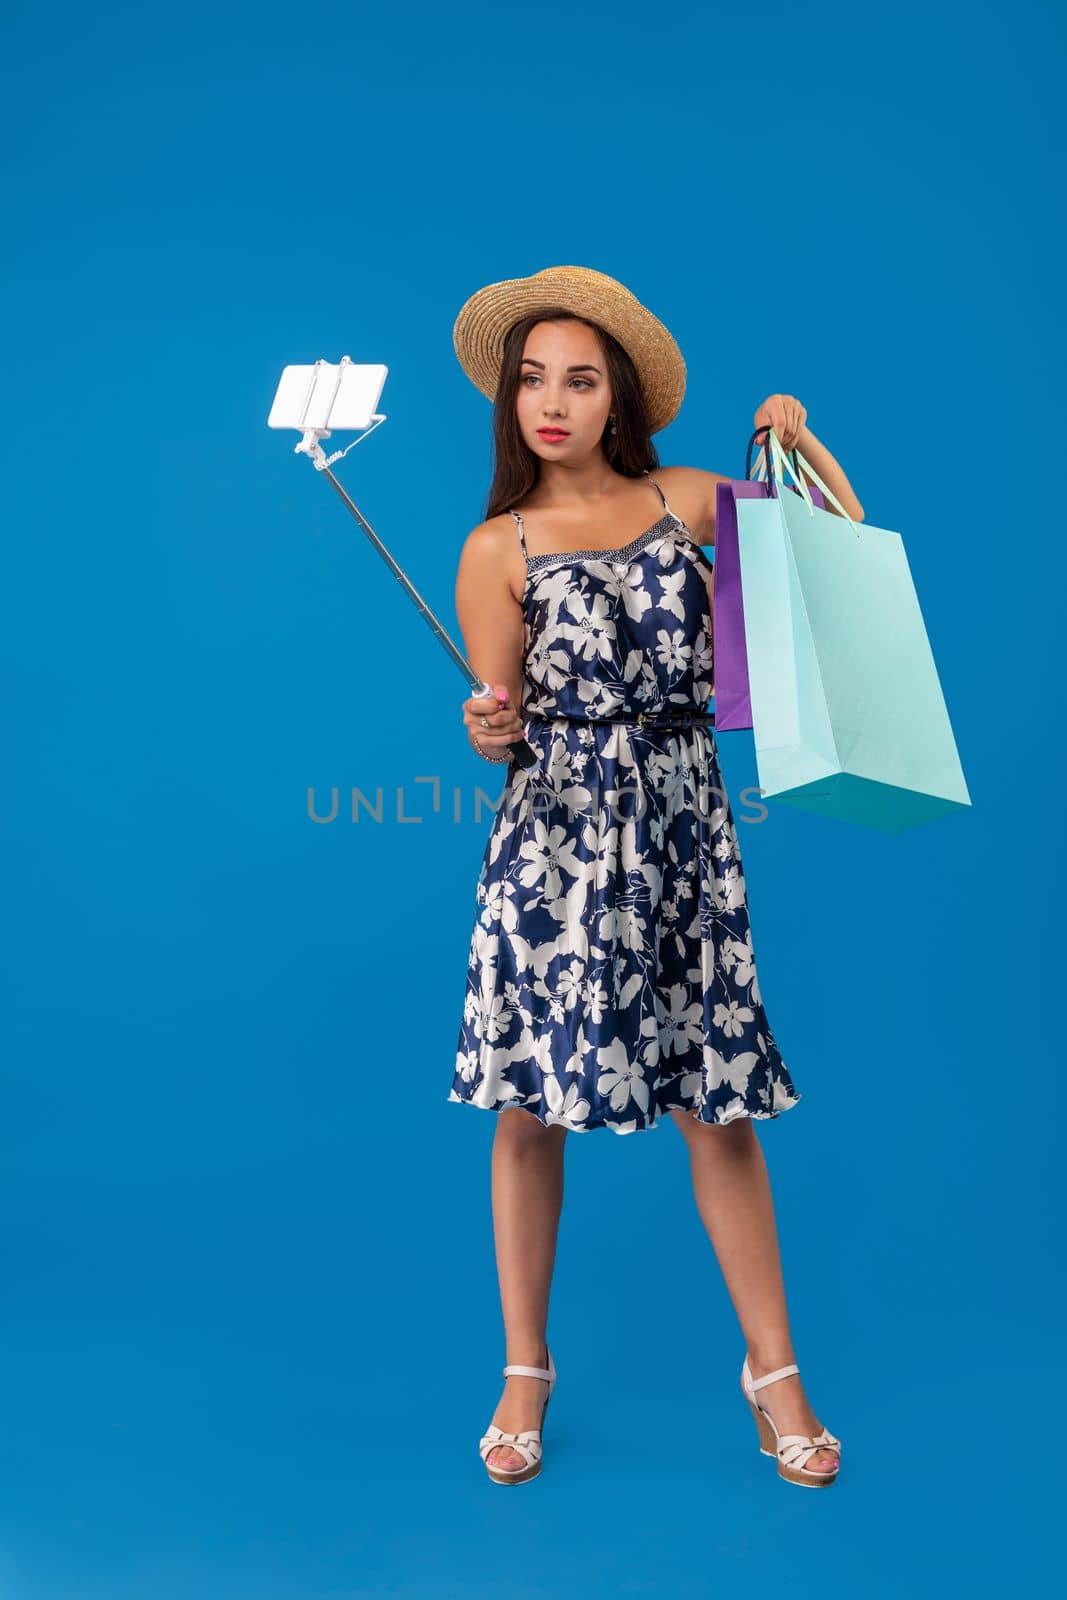 Trendy cheerful woman in casual clothes with shopping bags using selfie stick to take a self portrait on blue studio background with copy space. Emotions. Emotional woman